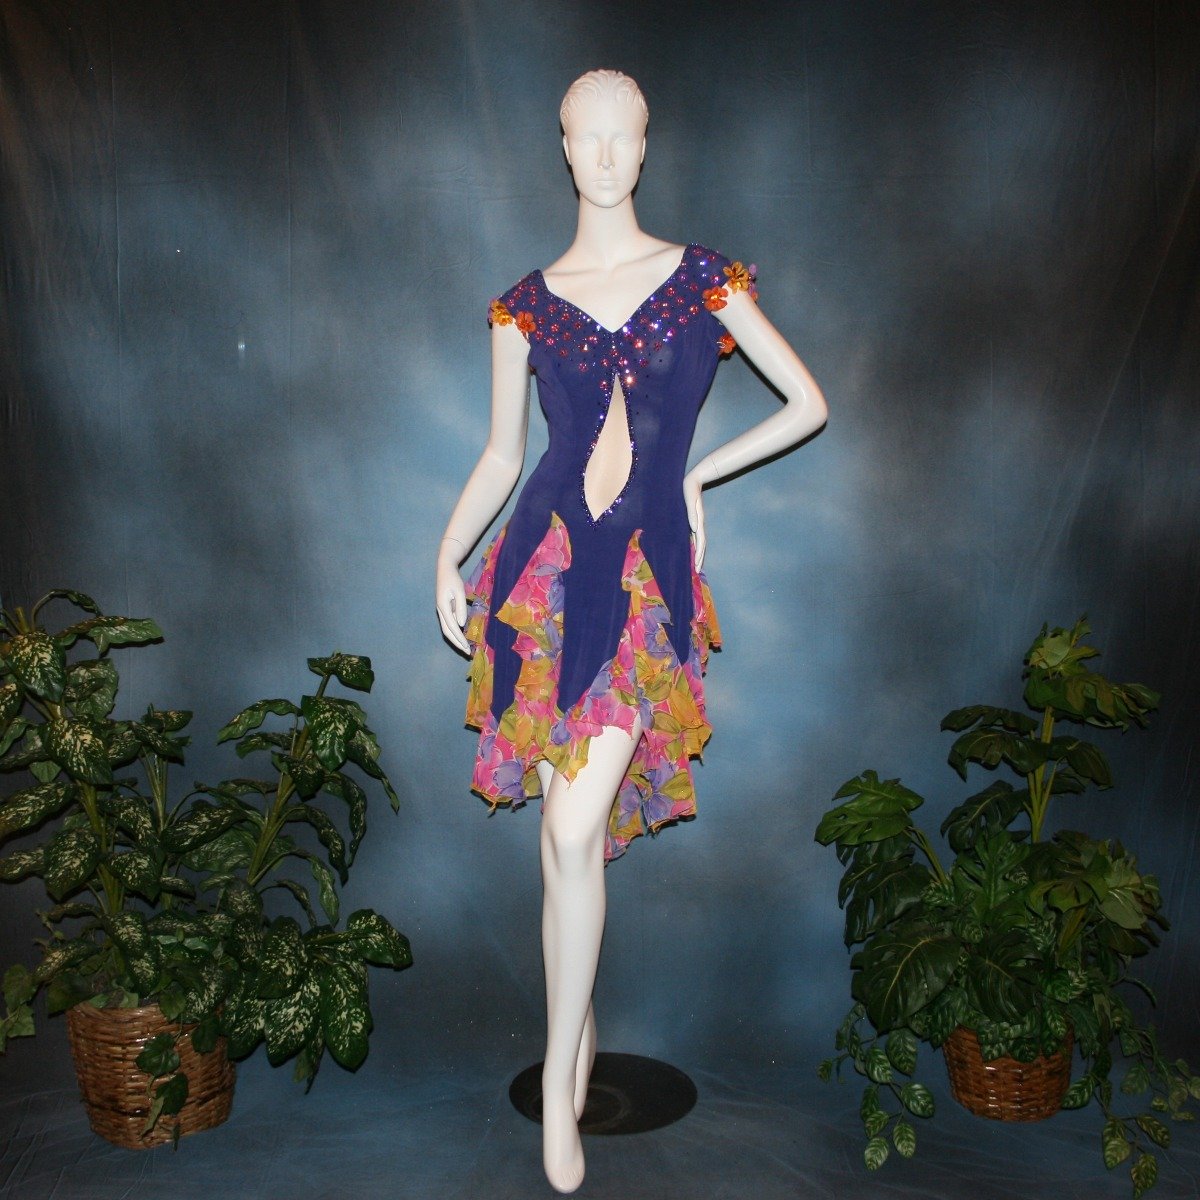 Crystal's Creations Converta ballroom dress featuring a Latin/rhythm dress created in luxurious deep perwinkle solid slinky with lots of flounces in accents of a floral chiffon in yellow with pinks & purples